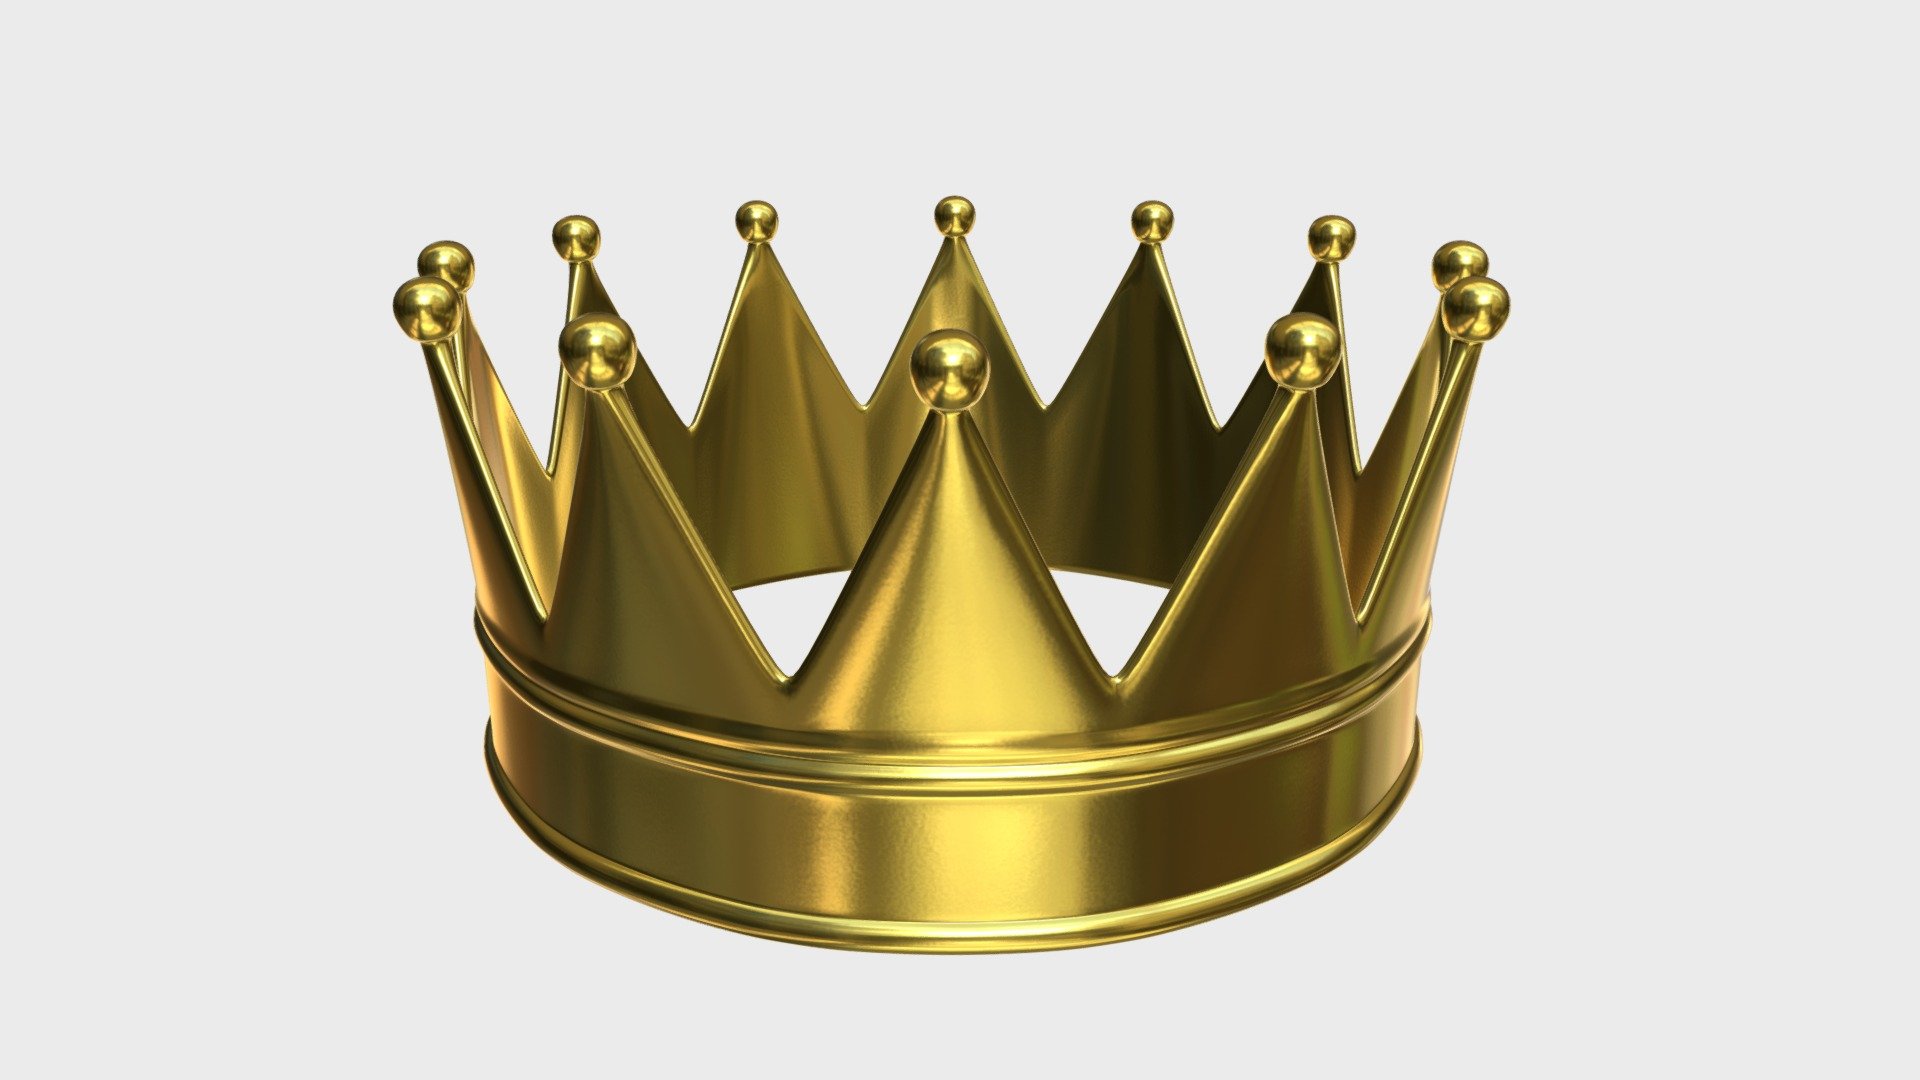 === The following description refers to the additional ZIP package provided with this model ===

Gold crown 3D Model, nr. 9 in my collection. Production-ready 3D Model, with PBR materials, textures, non overlapping UV Layout map provided in the package.

Quads only geometries (no tris/ngons).

Formats included: FBX, OBJ; scenes: BLEND (with Cycles / Eevee PBR Materials and Textures); other: png with Alpha.

1 Object (mesh), 1 PBR Material, UV unwrapped (non overlapping UV Layout map provided in the package); UV-mapped Textures.

UV Layout maps and Image Textures resolutions: 2048x2048; PBR Textures made with Substance Painter.

Polygonal, QUADS ONLY (no tris/ngons); 29568 vertices, 29568 quad faces (59136 tris).

Real world dimensions; scene scale units: cm in Blender 3.1 (that is: Metric with 0.01 scale).

Uniform scale object (scale applied in Blender 3.1) 3d model